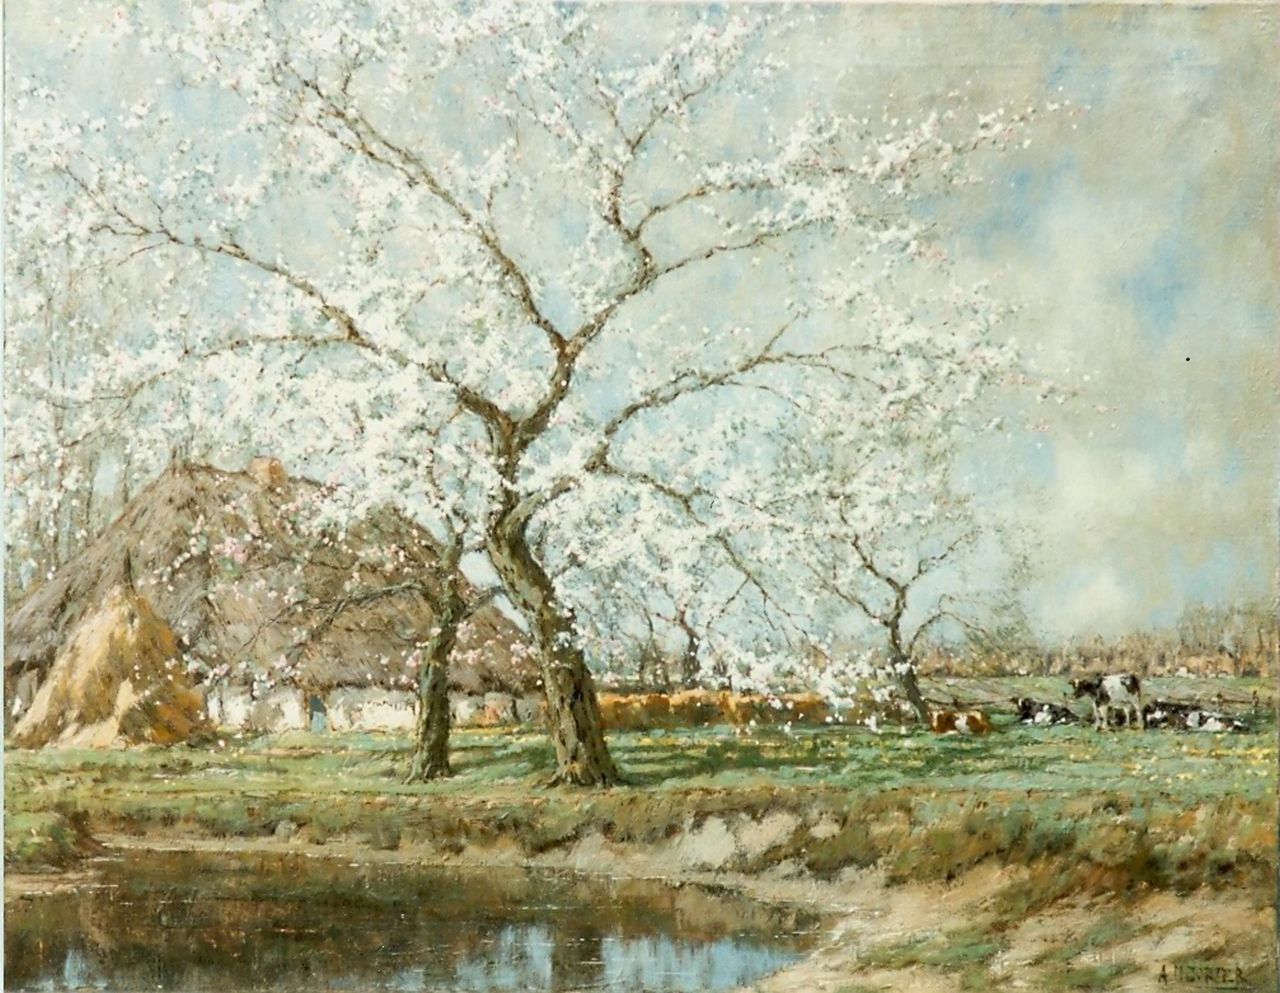 Gorter A.M.  | 'Arnold' Marc Gorter, An orchard, oil on canvas 75.4 x 96.3 cm, signed l.r.